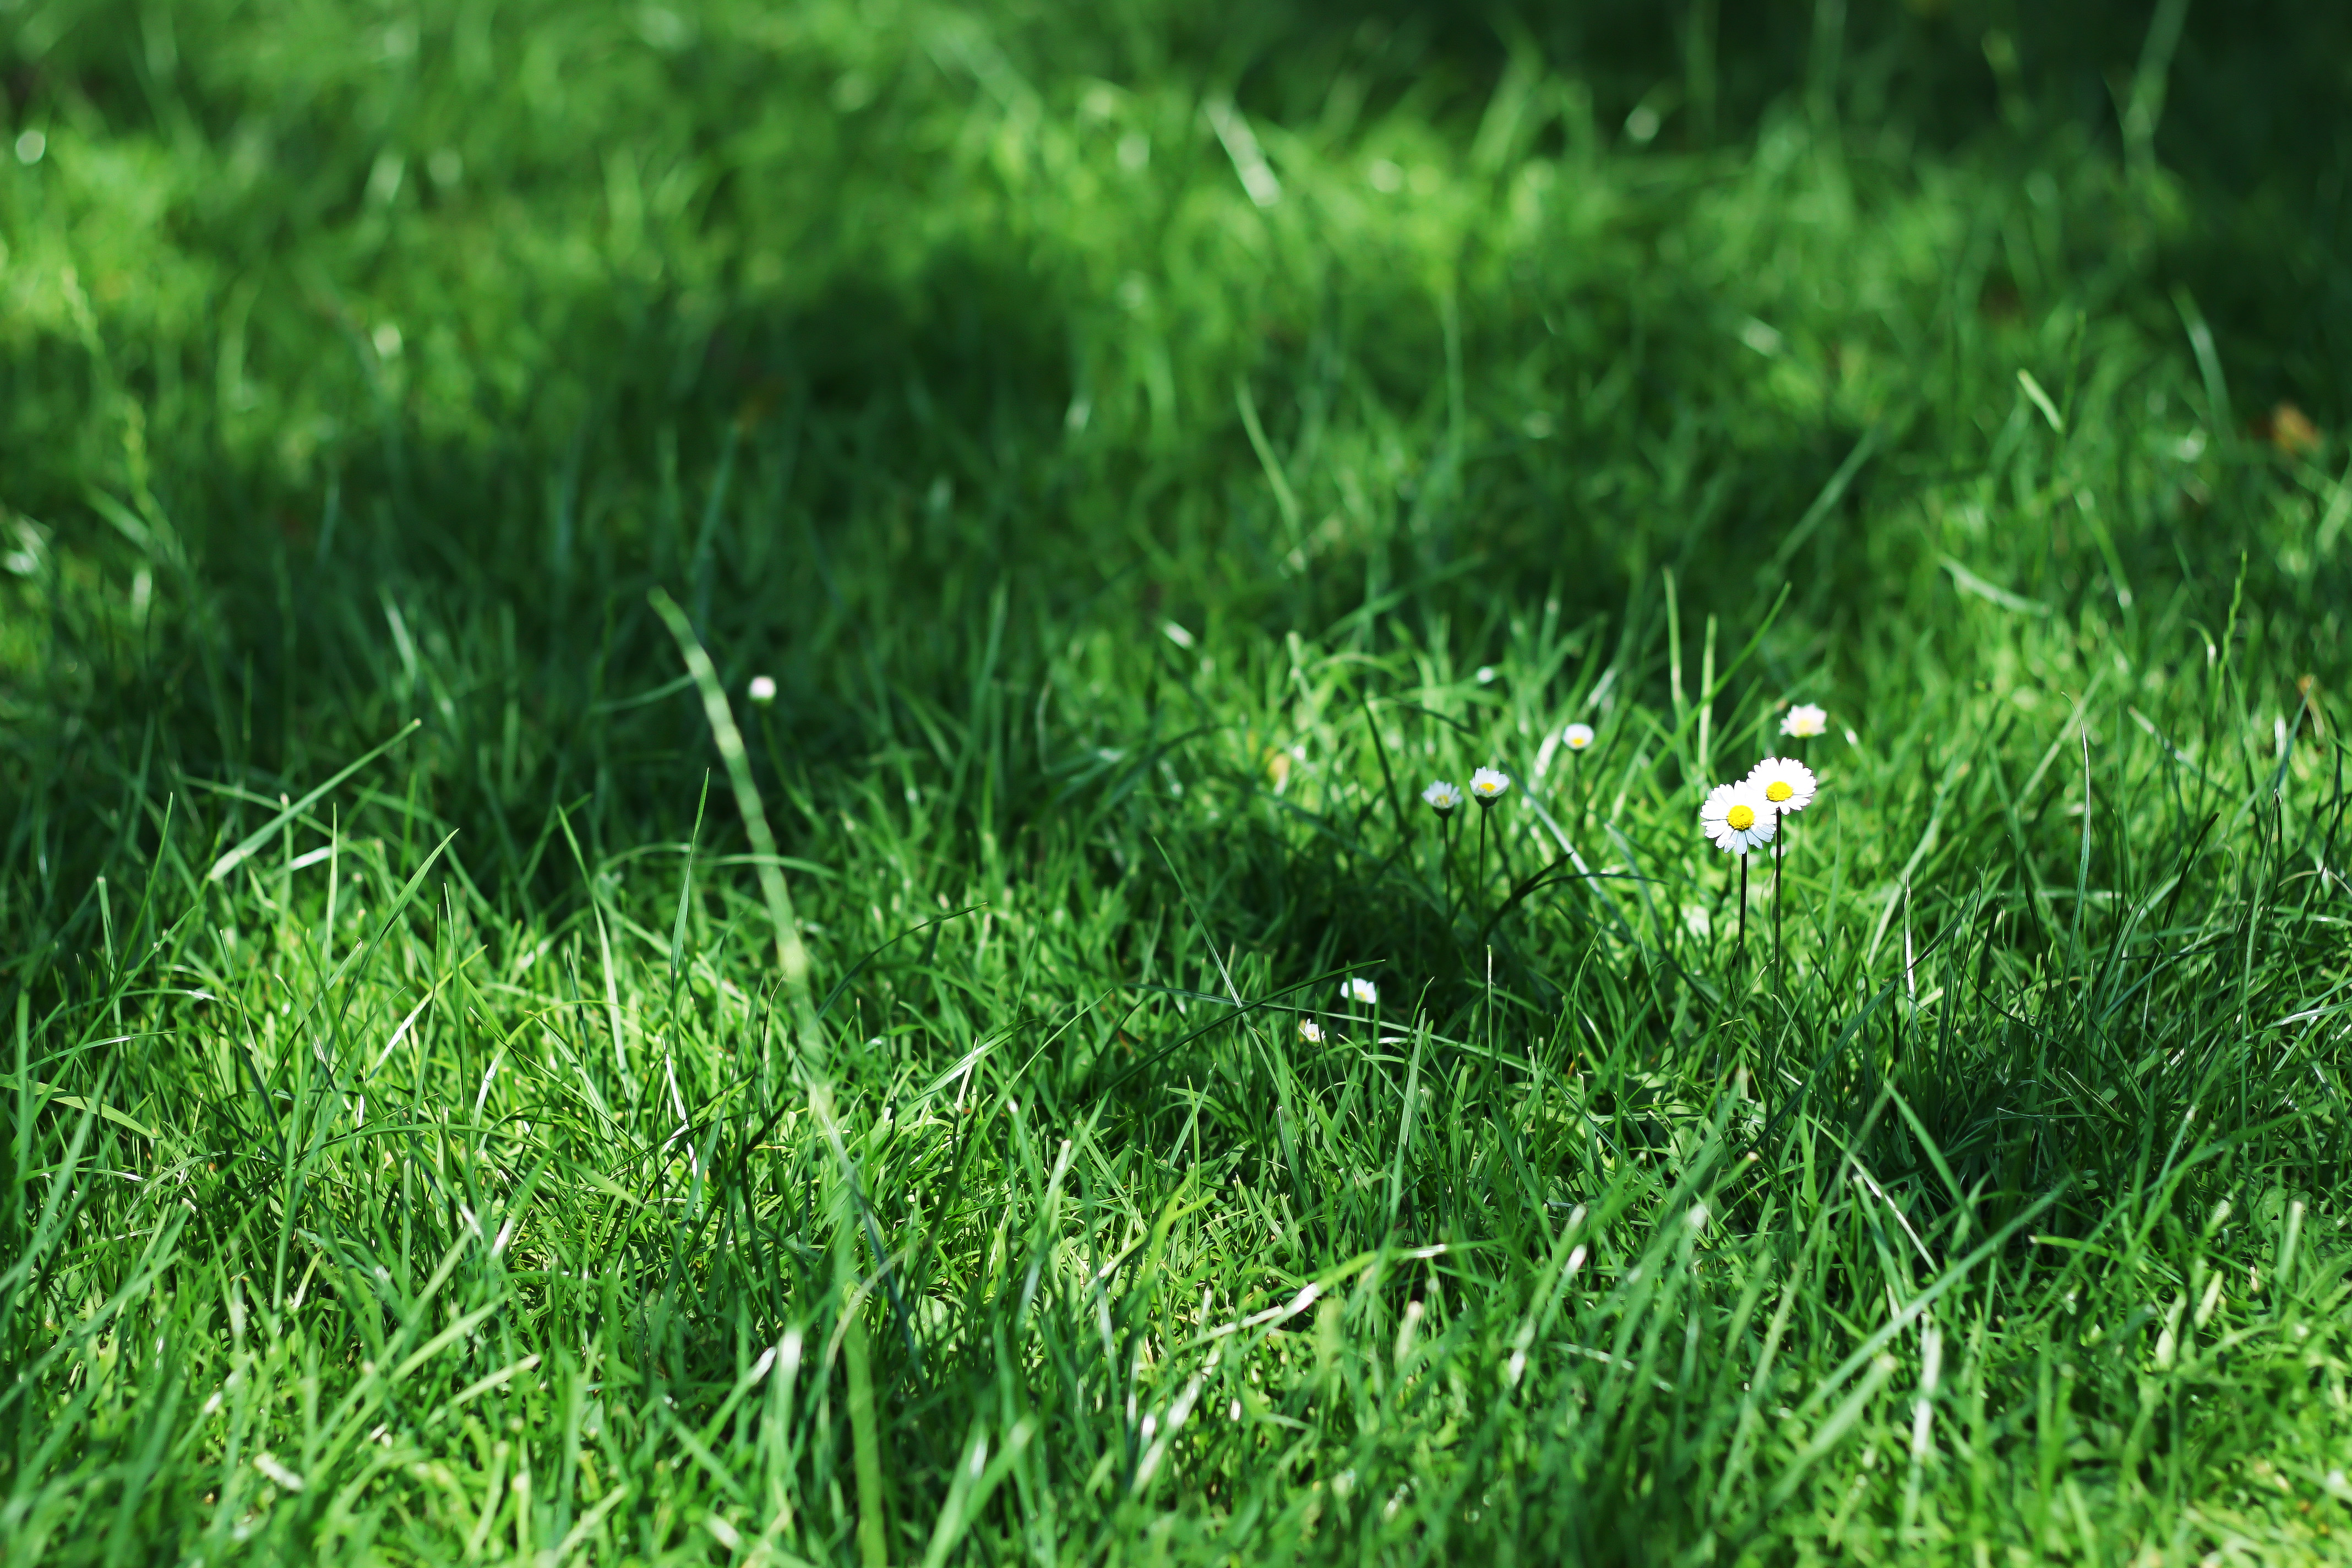 50+ 4K Grass Wallpapers | Background Images